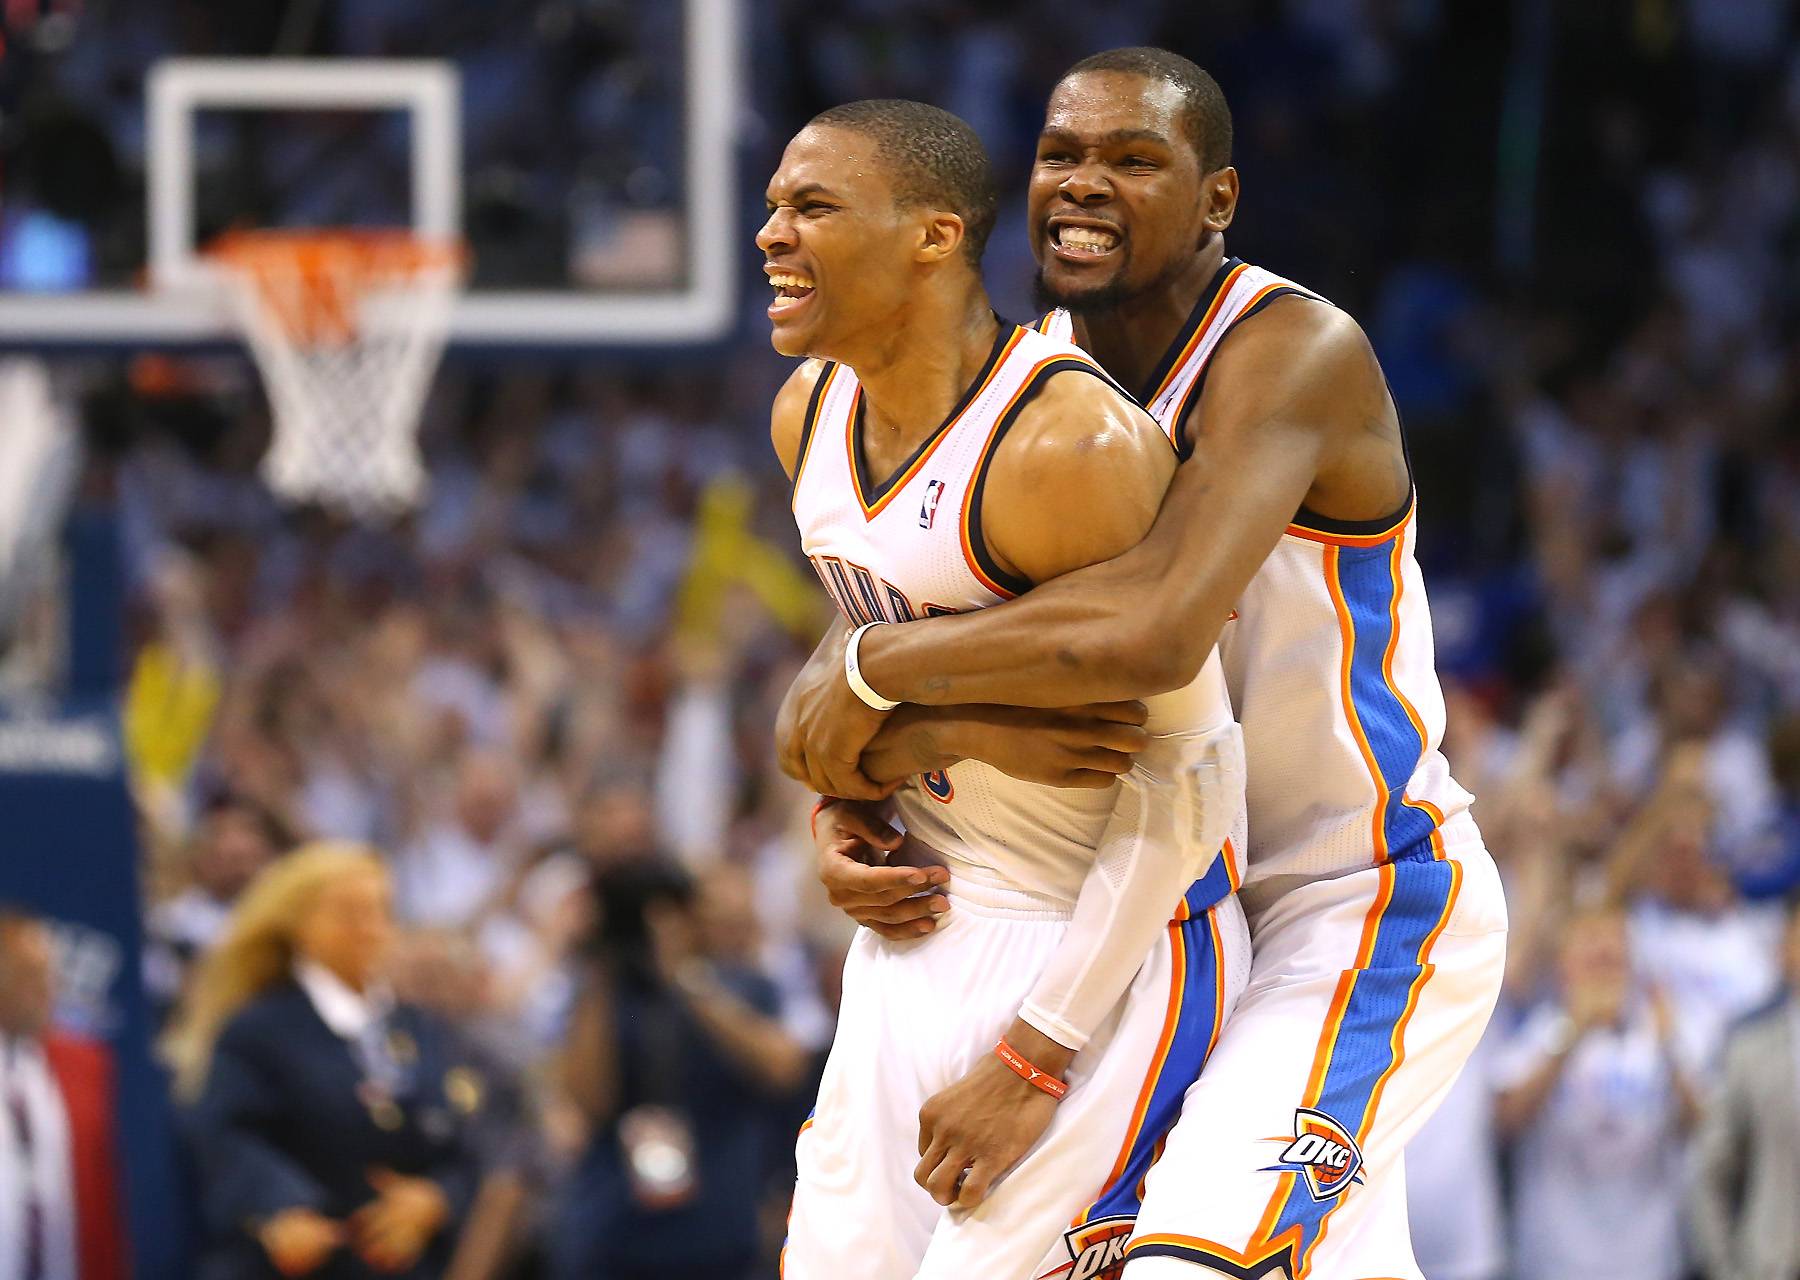 An NBA Bromance Breakup - And just like that, one of the NBA’s most notorious bromances since Jordan and Pippen is a wrap. When it was announced over the weekend that Kevin Durant would leave the Oklahoma City Thunder for the Golden State Warriors, the world simultaneously congratulated Durant and worried about his buddy and partner-in-crime Russell Westbrook. Was he OK? Will he survive by himself? We’re totally joking considering all signs pointed to Russell being just fine over the 4th of July holiday.On the real, we wouldn’t be surprised if this here playlist is in rotation on the Westbrook phone. It’s always hard to say goodbye. – Jon Reyes(Photo: Ronald Martinez/Getty Images)